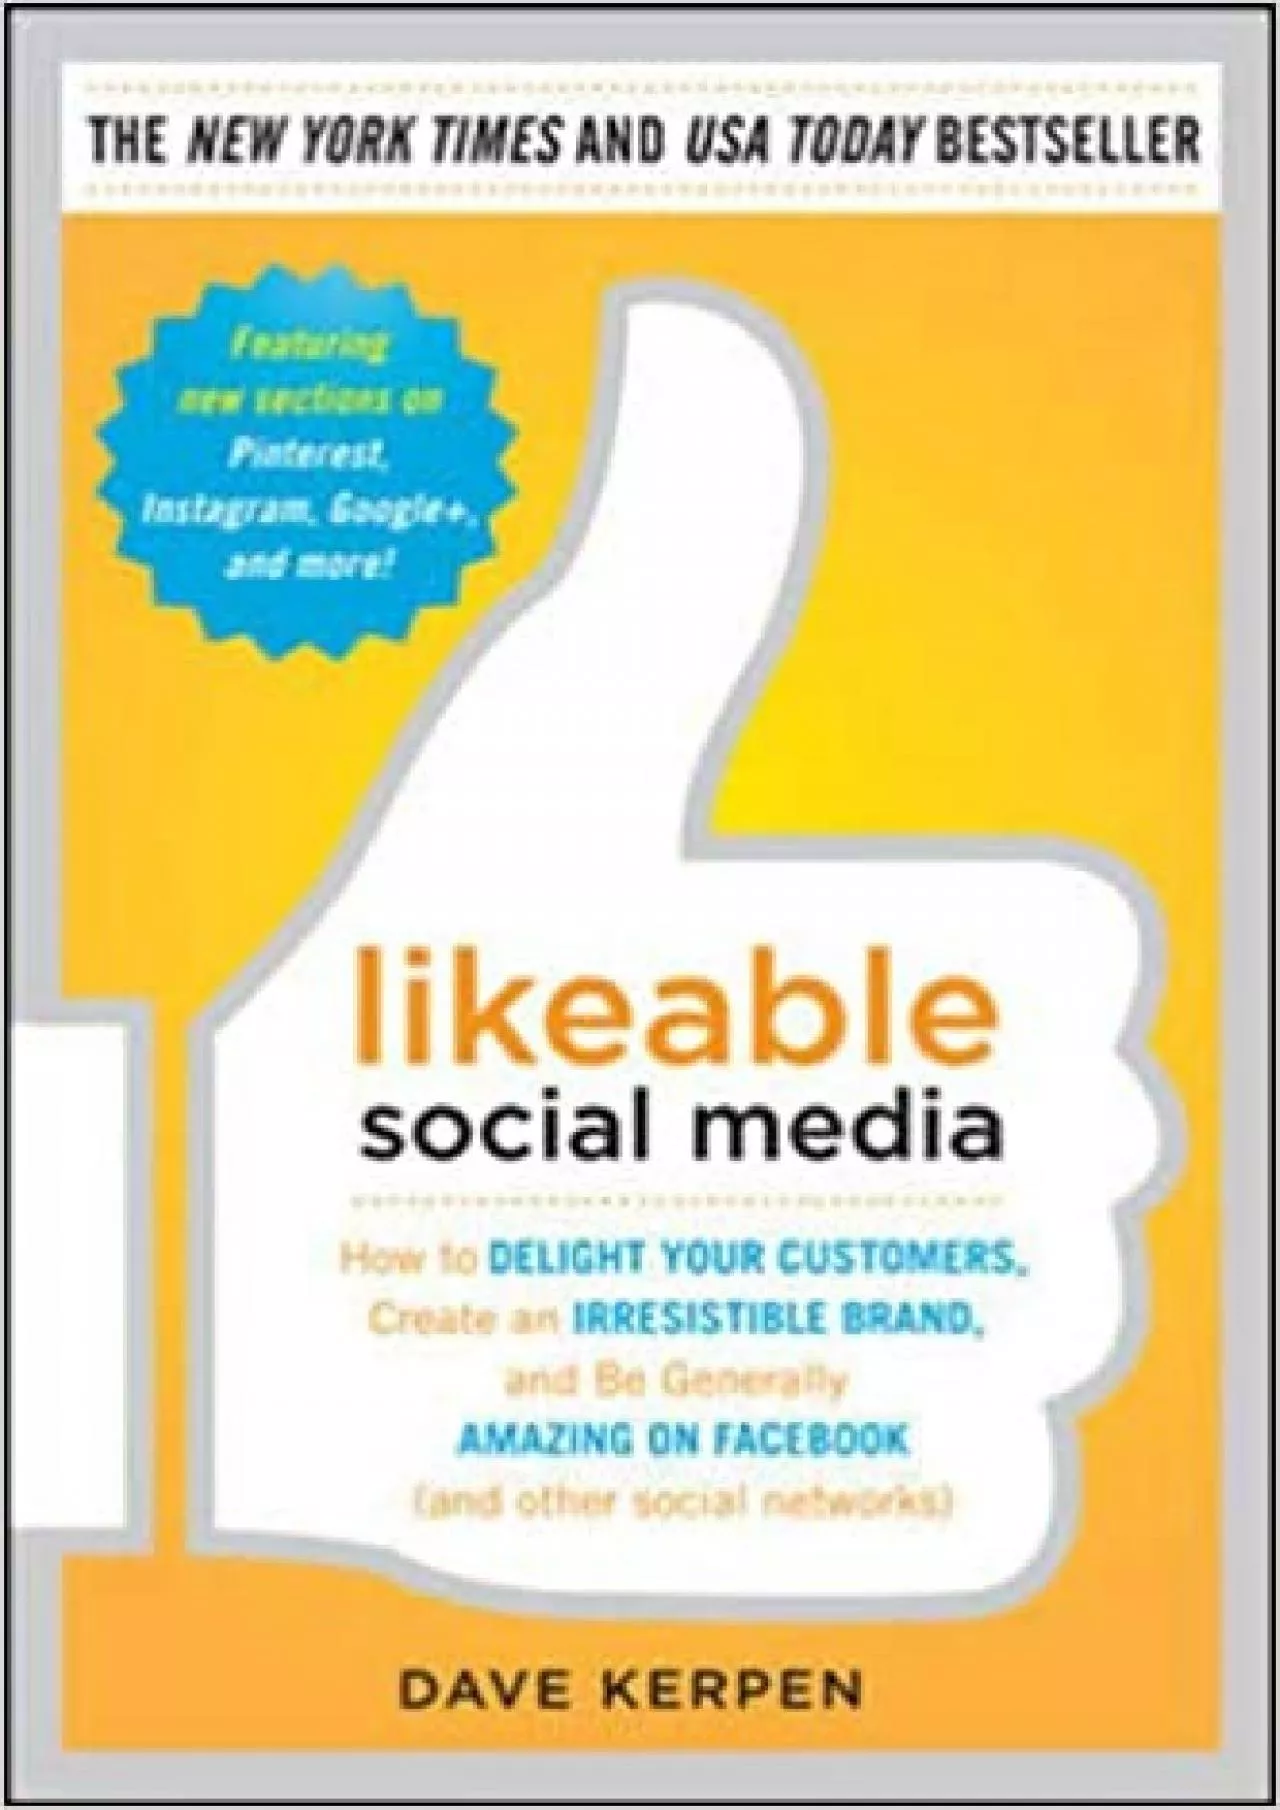 Likeable Social Media How to Delight Your Customers, Create an Irresistible Brand, and